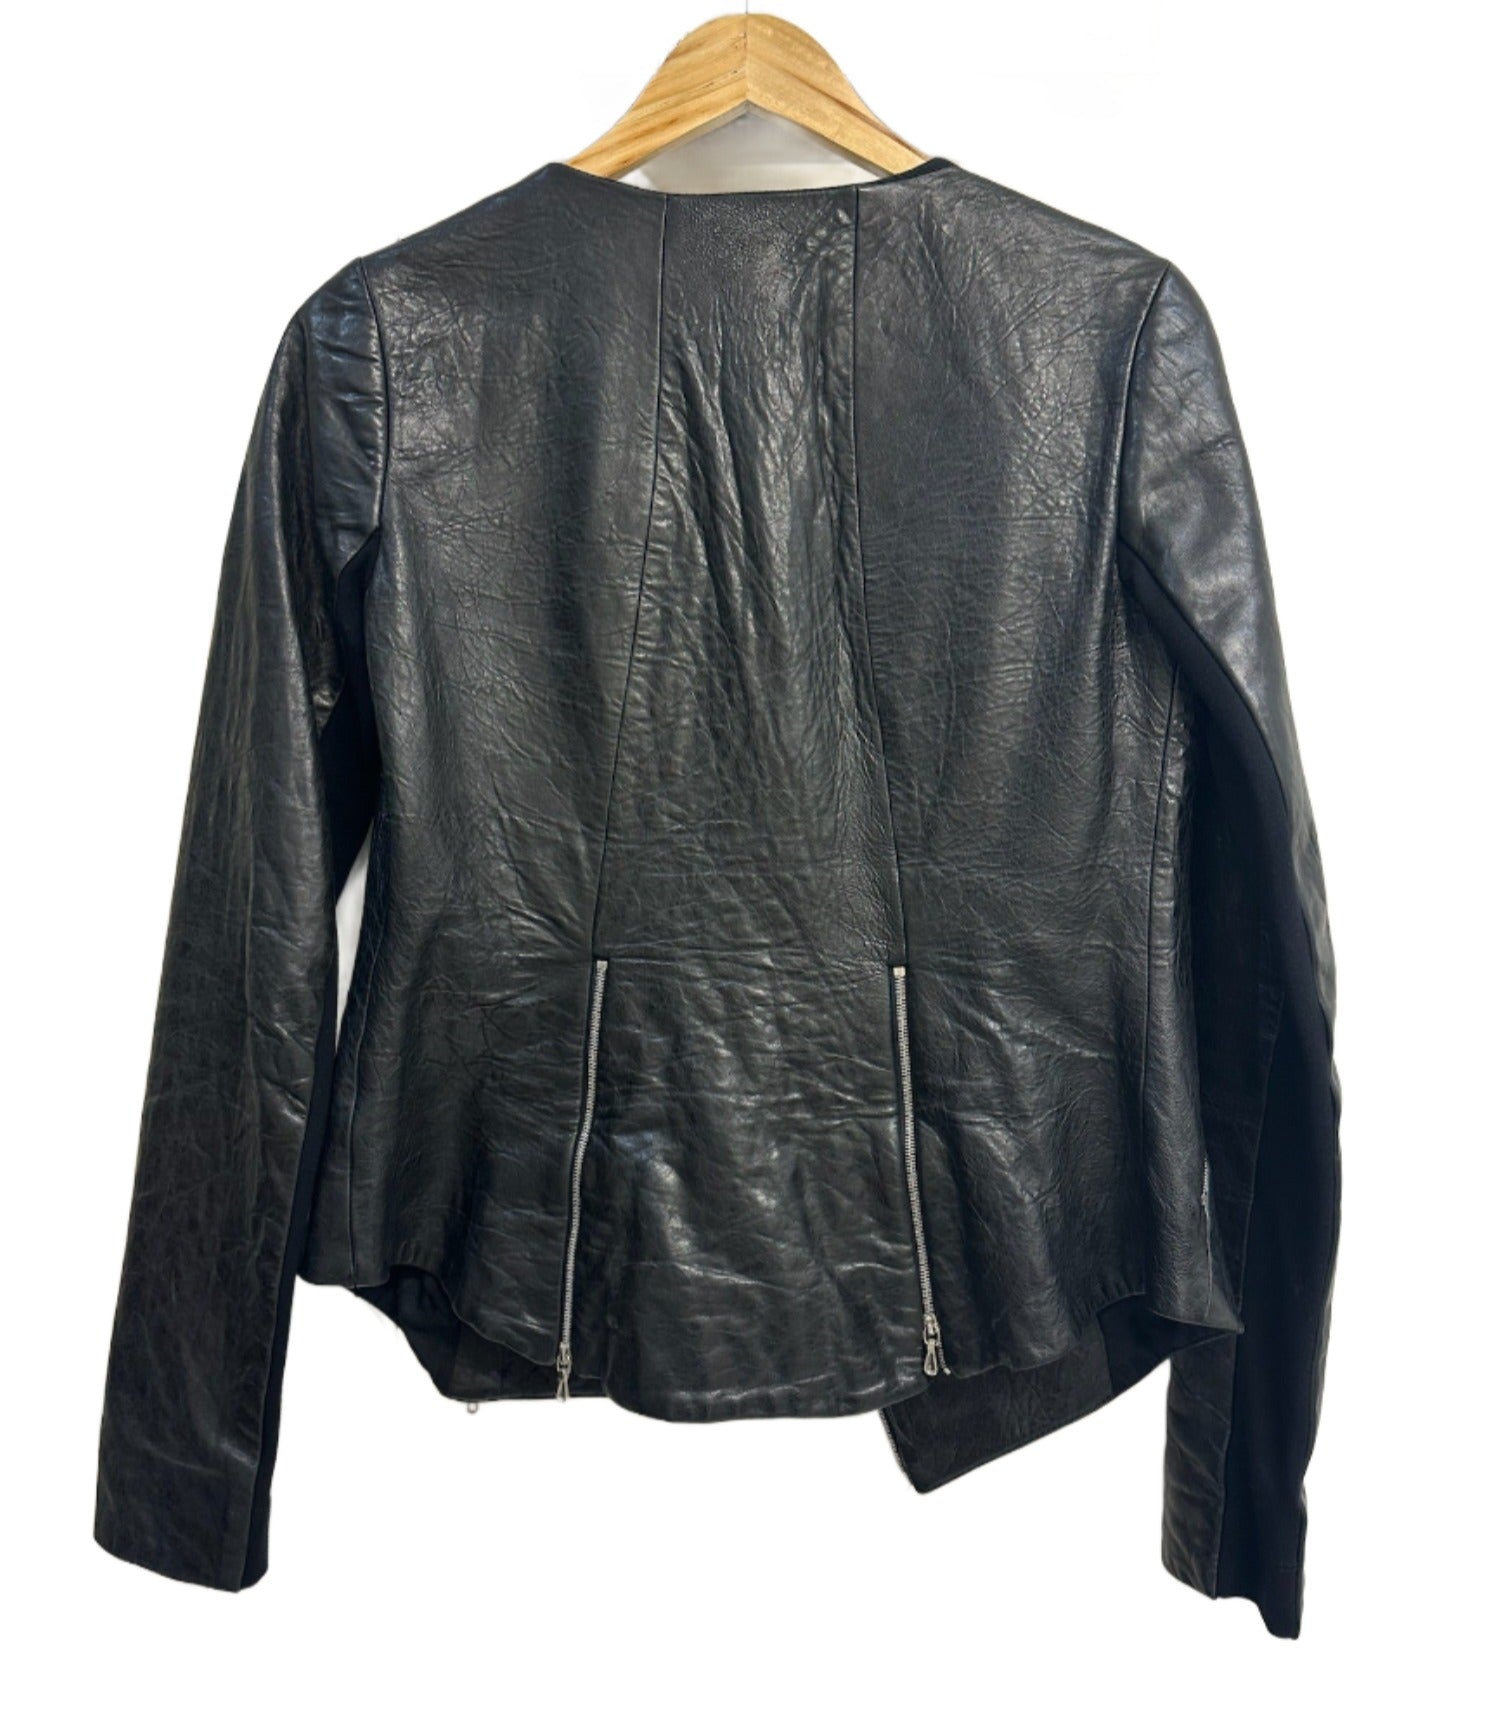 Willow Black Leather Jacket